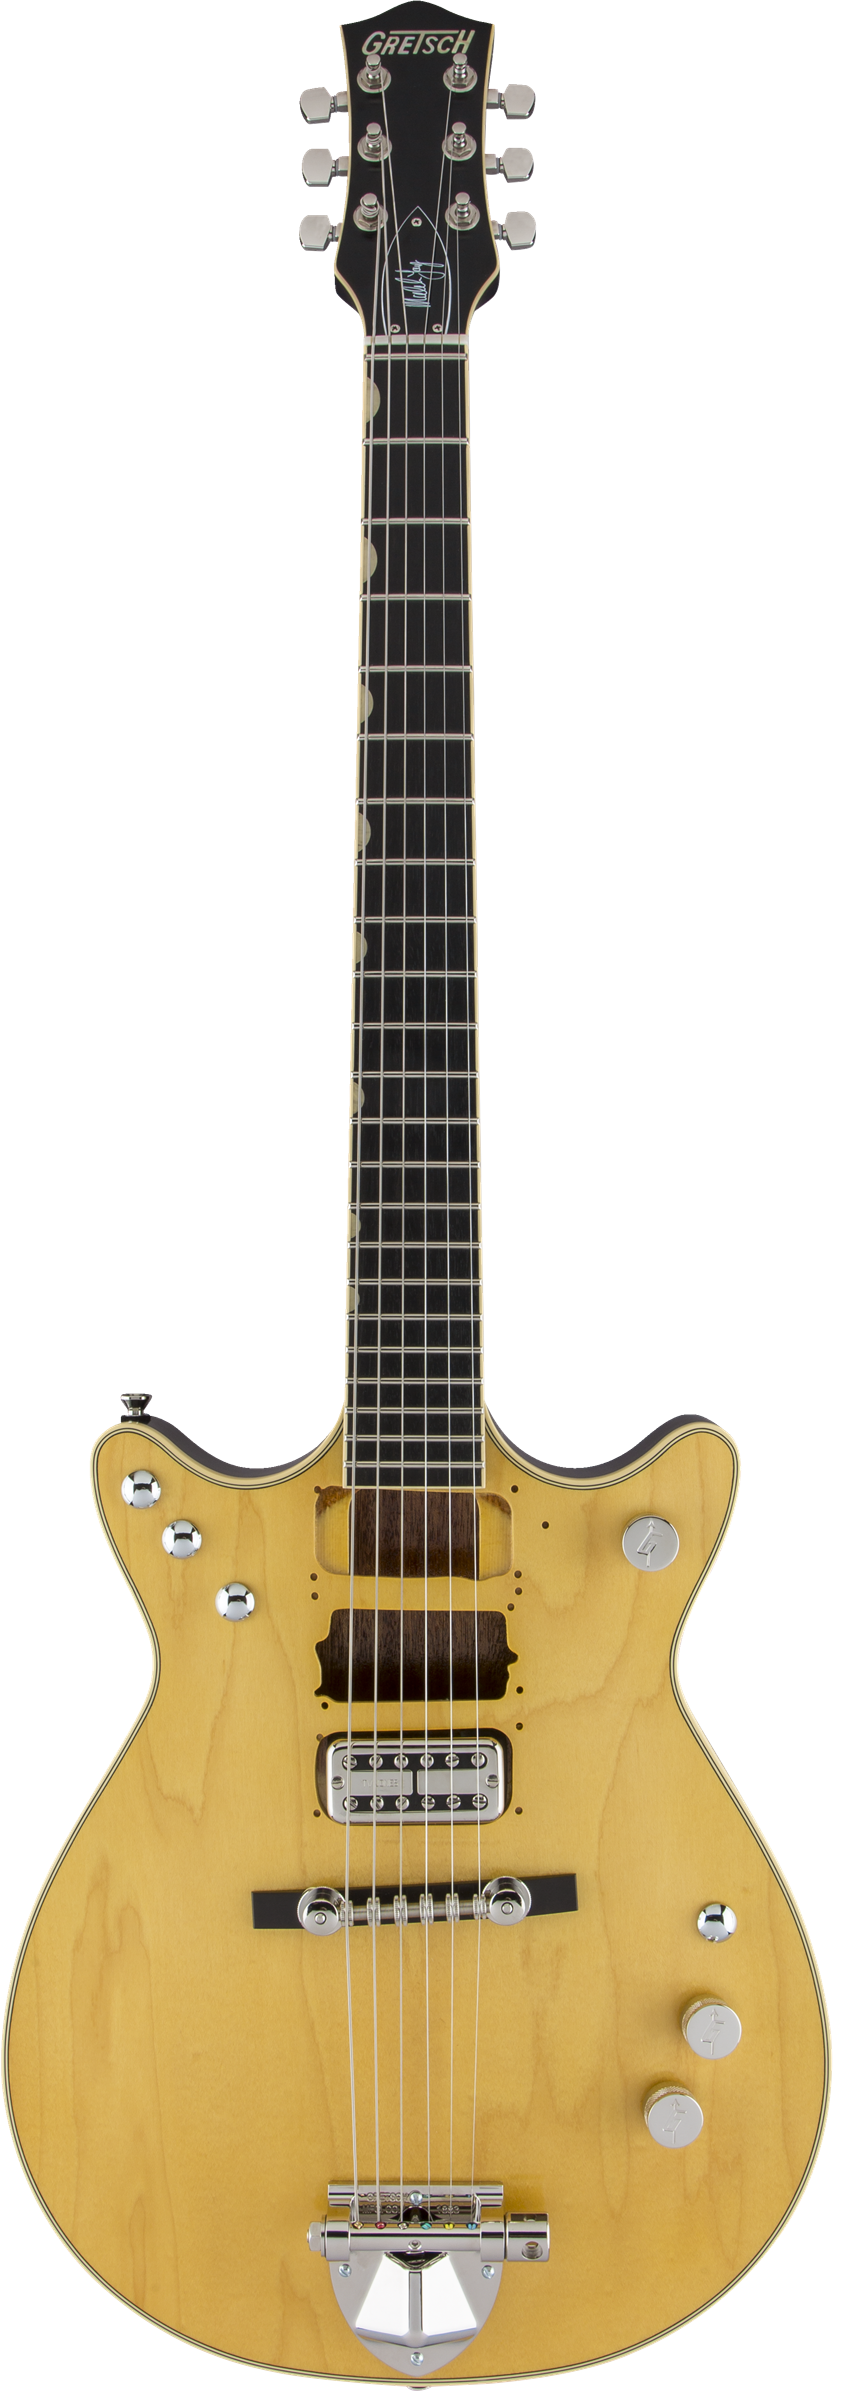 G6131-MY Malcolm Young Signature Jet